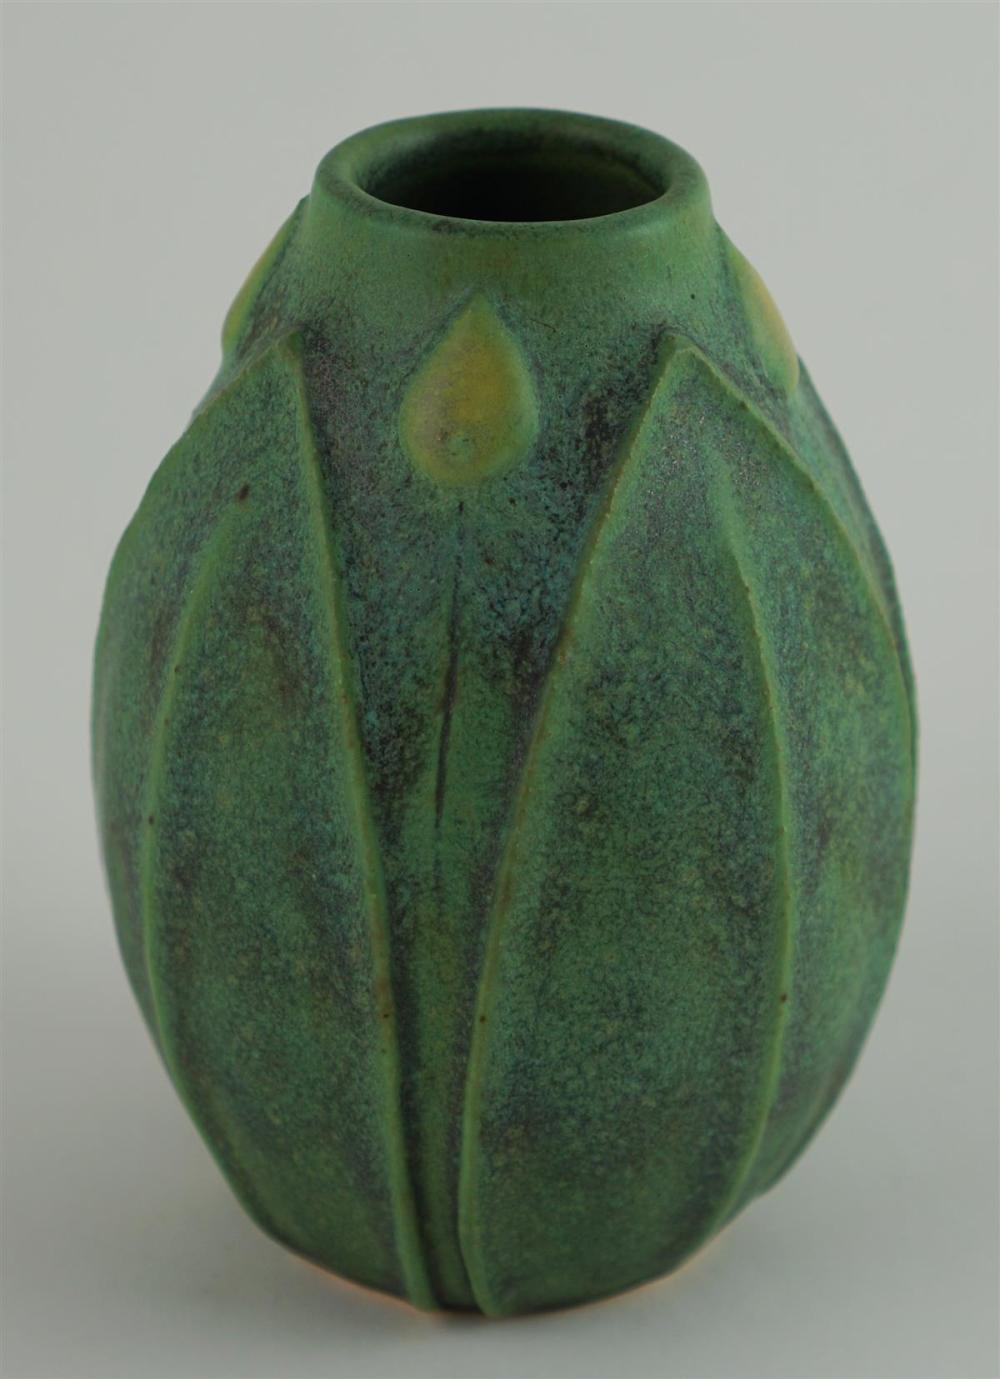 SMALL ART POTTERY GREEN AND YELLOW